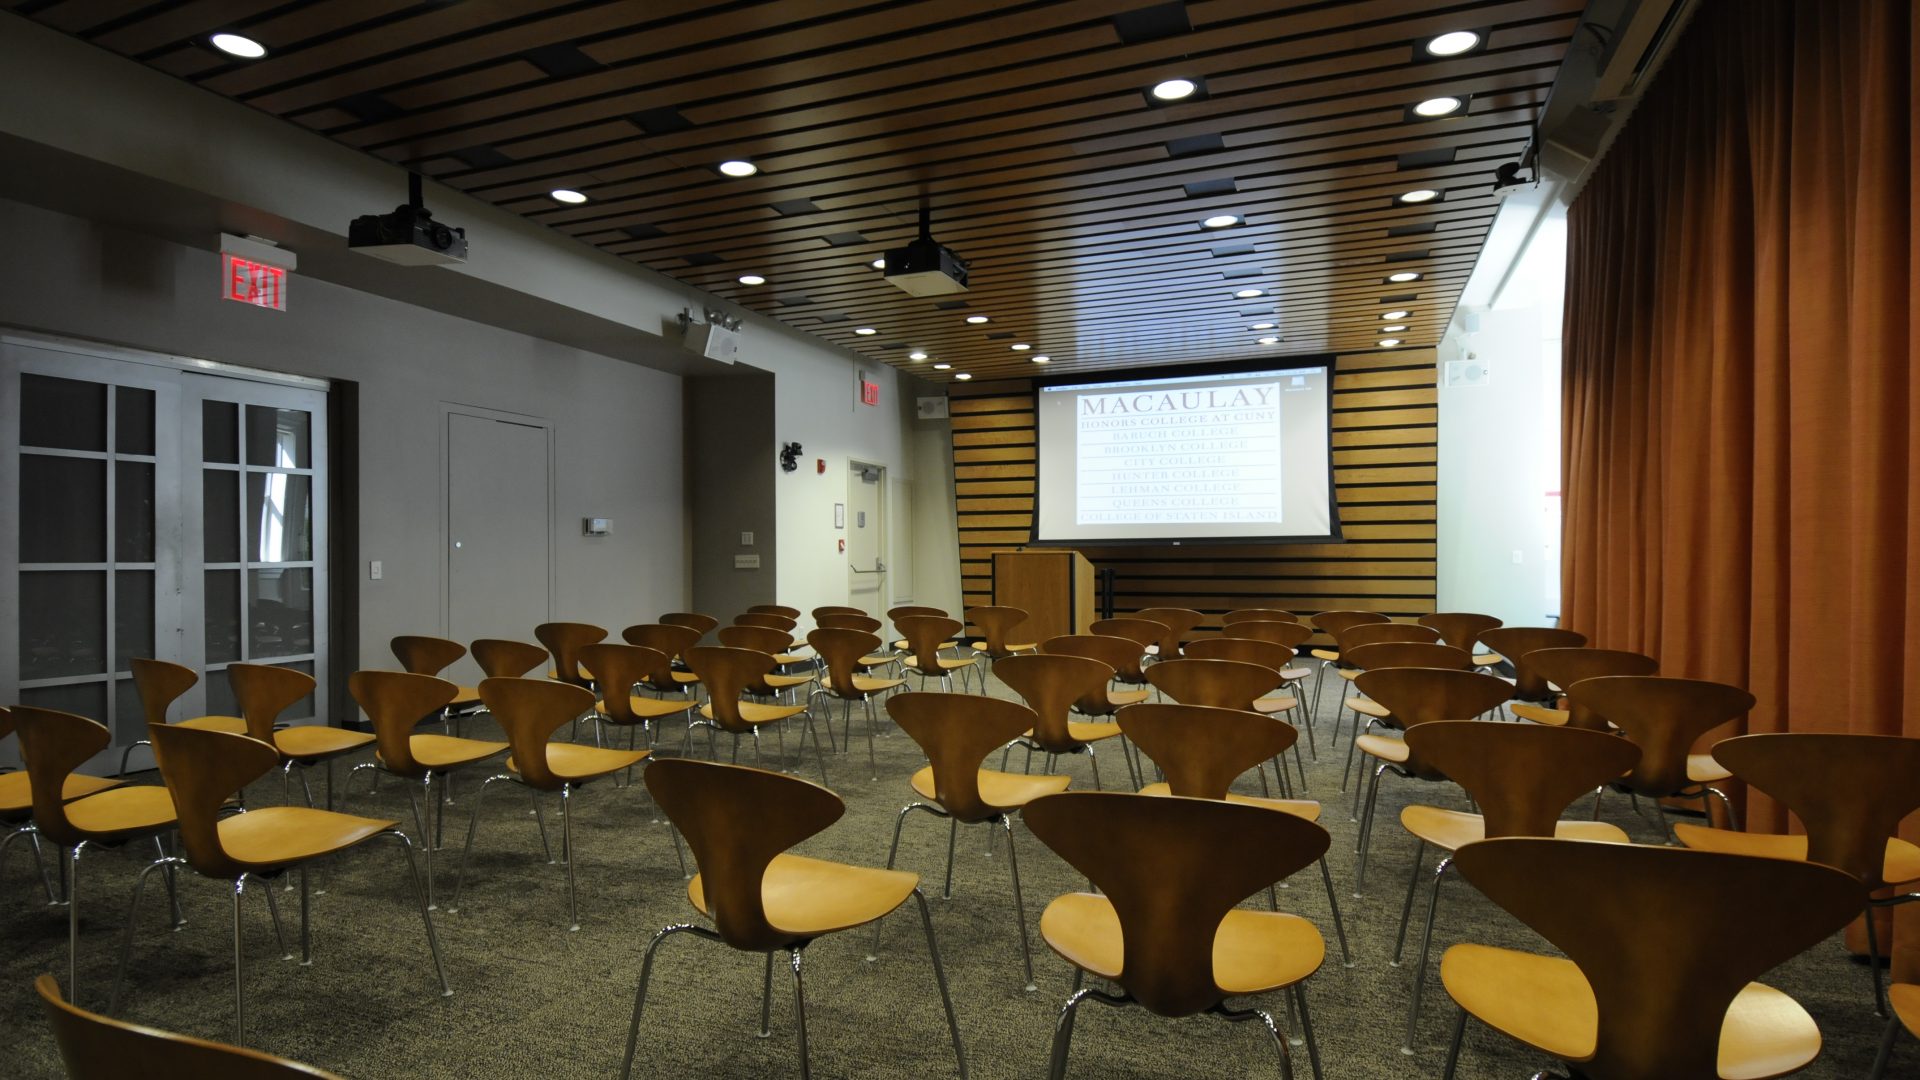 Photo of the Macaulay Lecture Hall